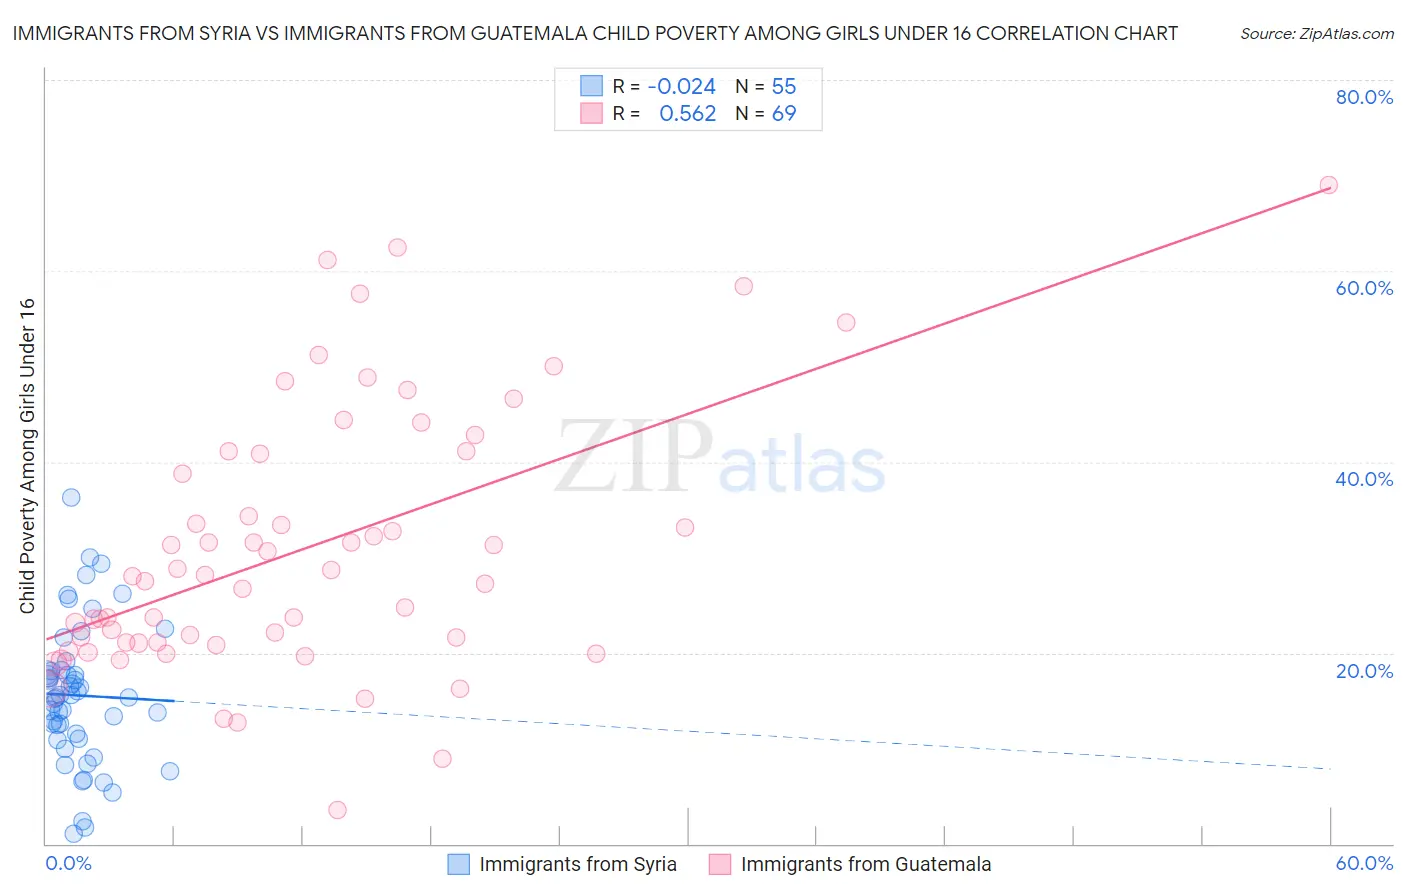 Immigrants from Syria vs Immigrants from Guatemala Child Poverty Among Girls Under 16